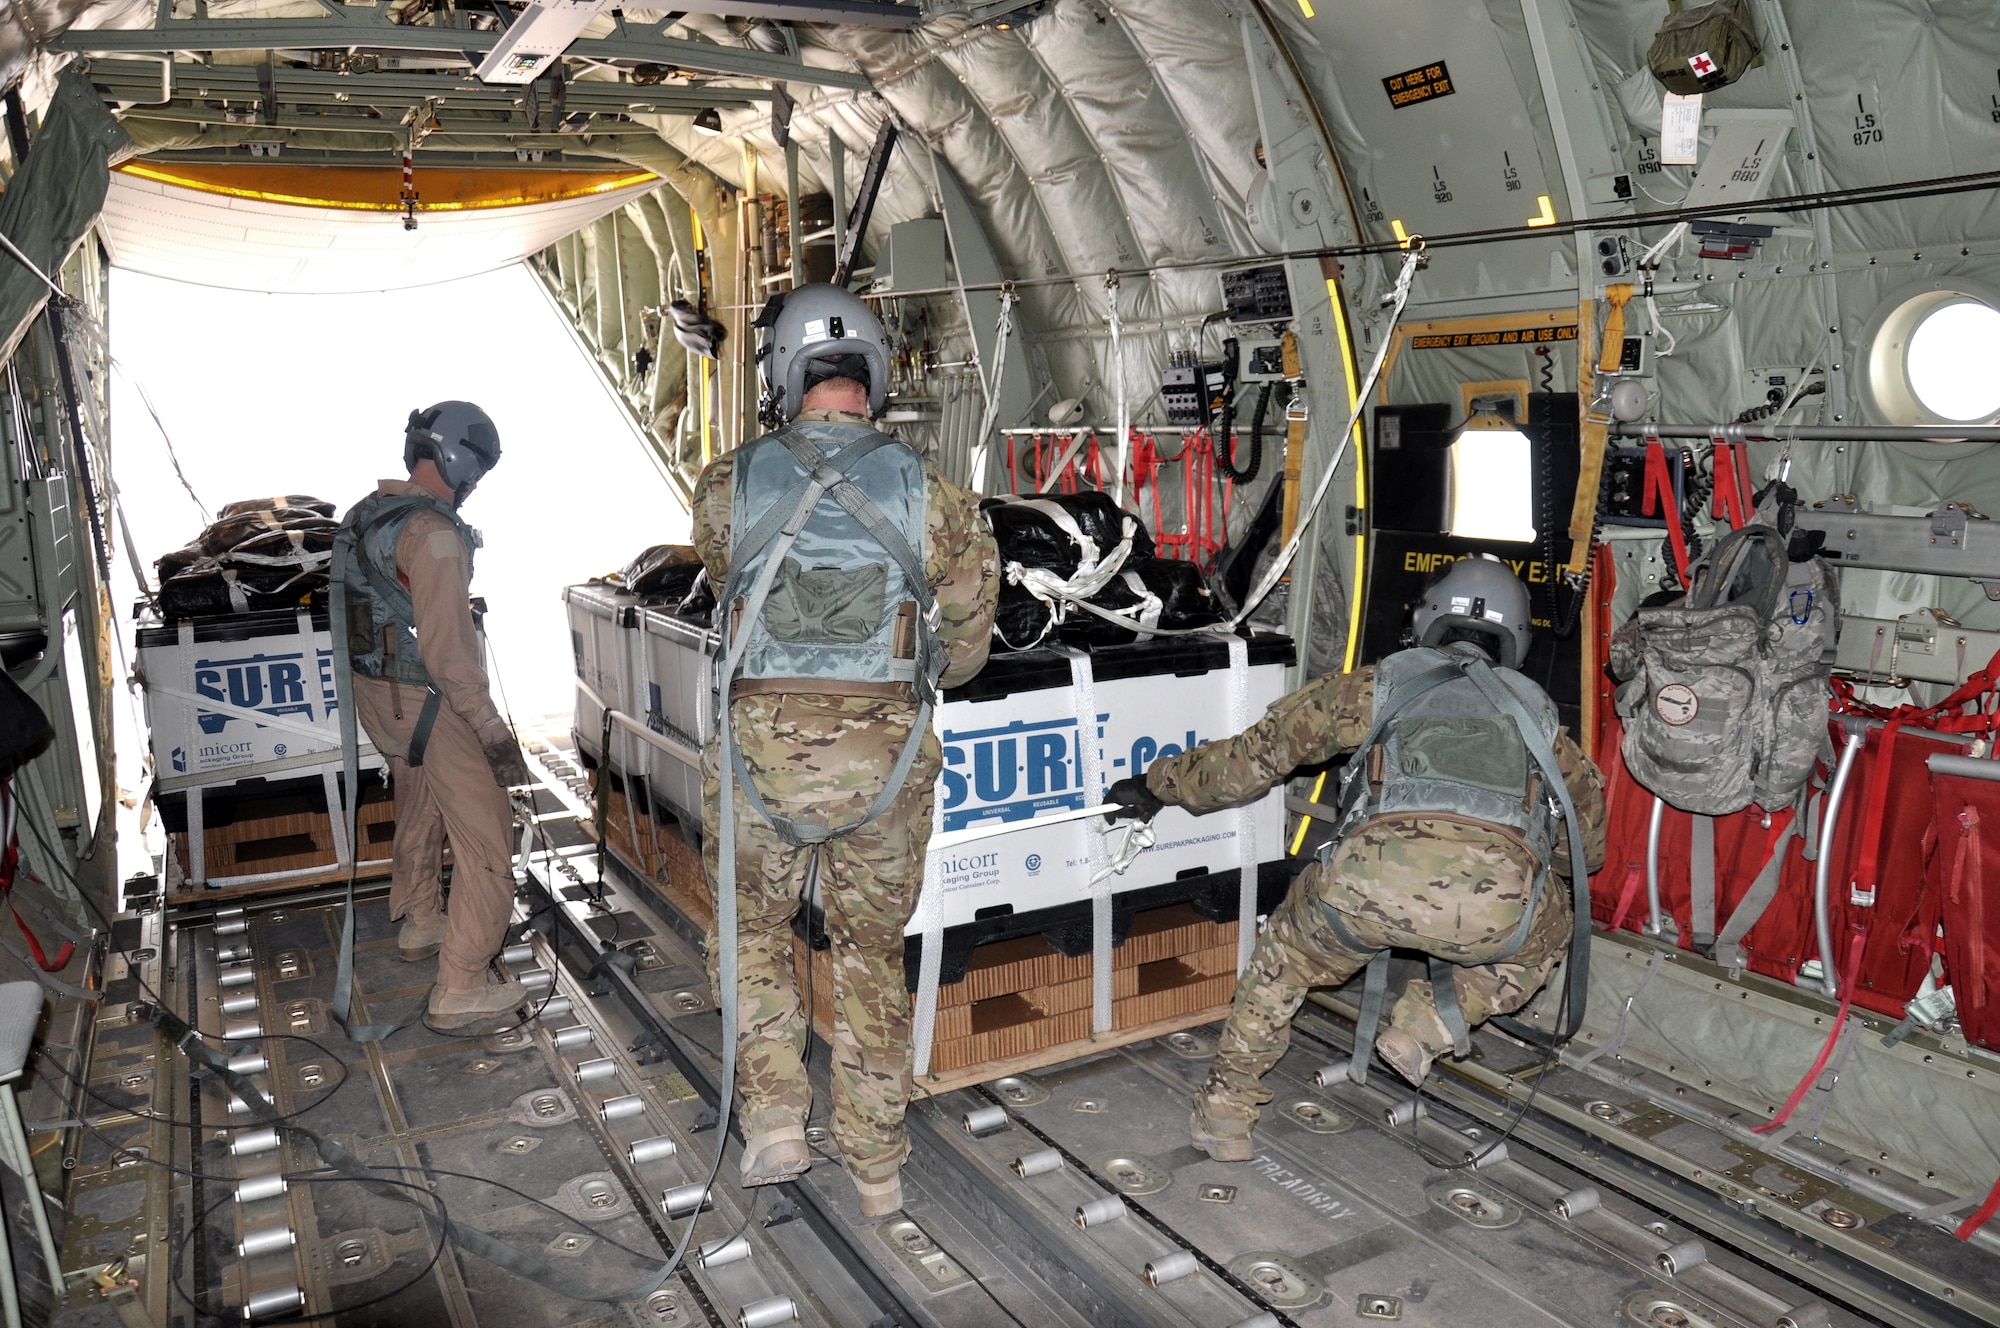 Senior Airman Dan Simonsen, Senior Master Sgt. Steve Martin and Senior Airman Marcus Wright, loadmasters with the 772nd Expeditionary Airlift Squadron, prepare to perform a Low Cost Low Altitude airdrop from the back of a C-130J in southwest Afghanistan Nov. 15. They are deployed from Dyess Air Force Base, Texas. (U.S. Air Force photo/Capt. Tristan Hinderliter)